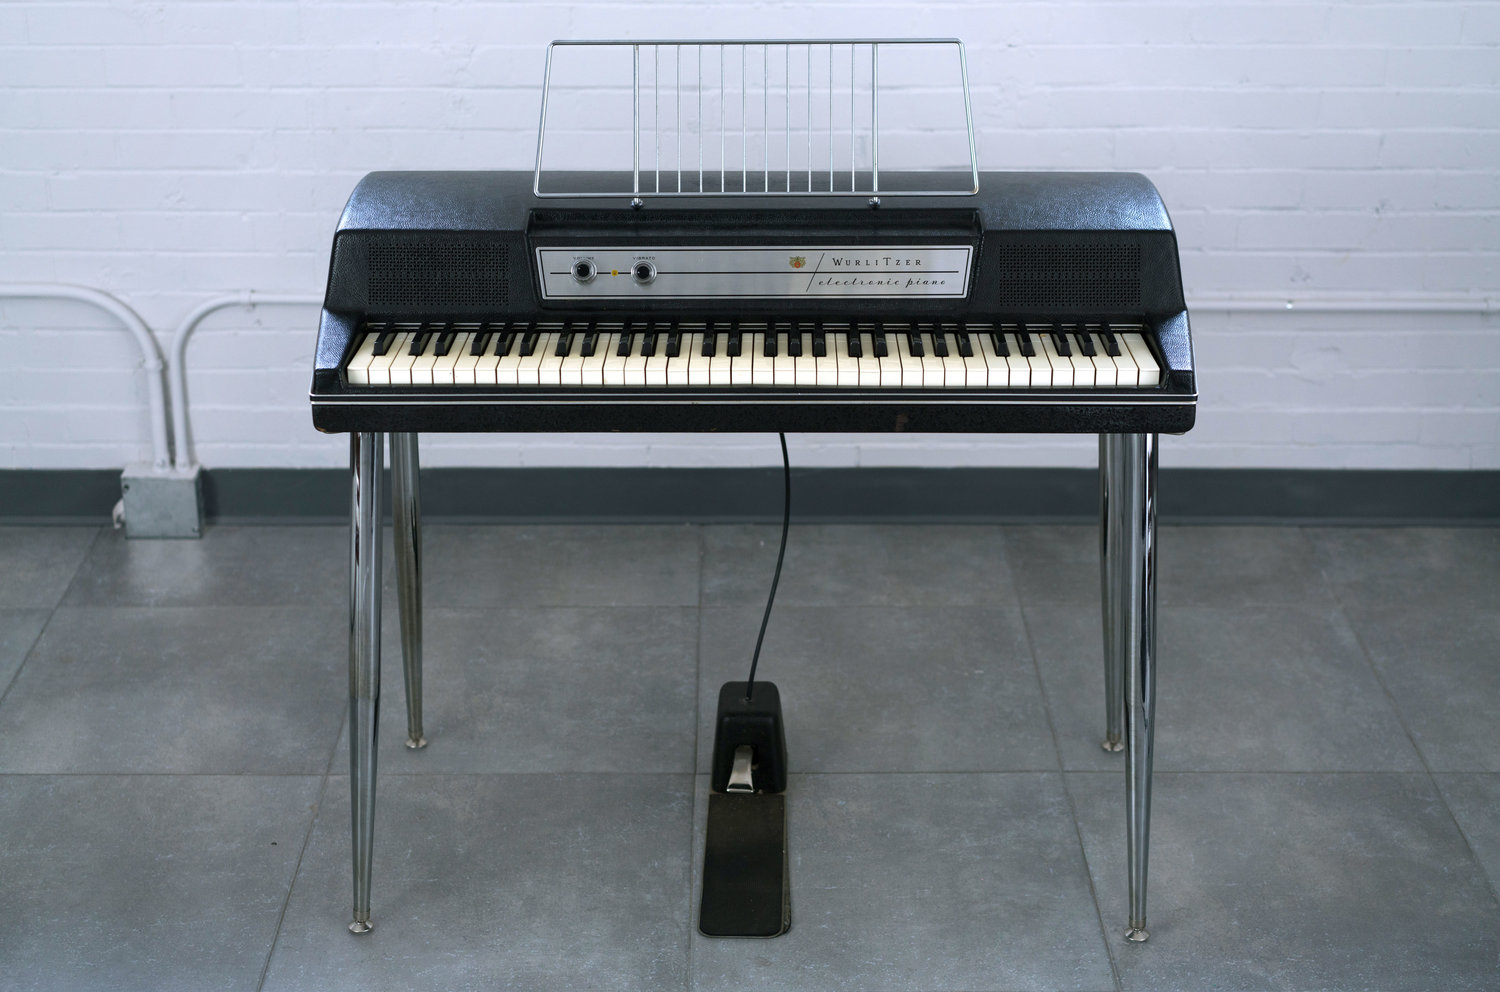 Differences Between the Wurlitzer 200 and 200a